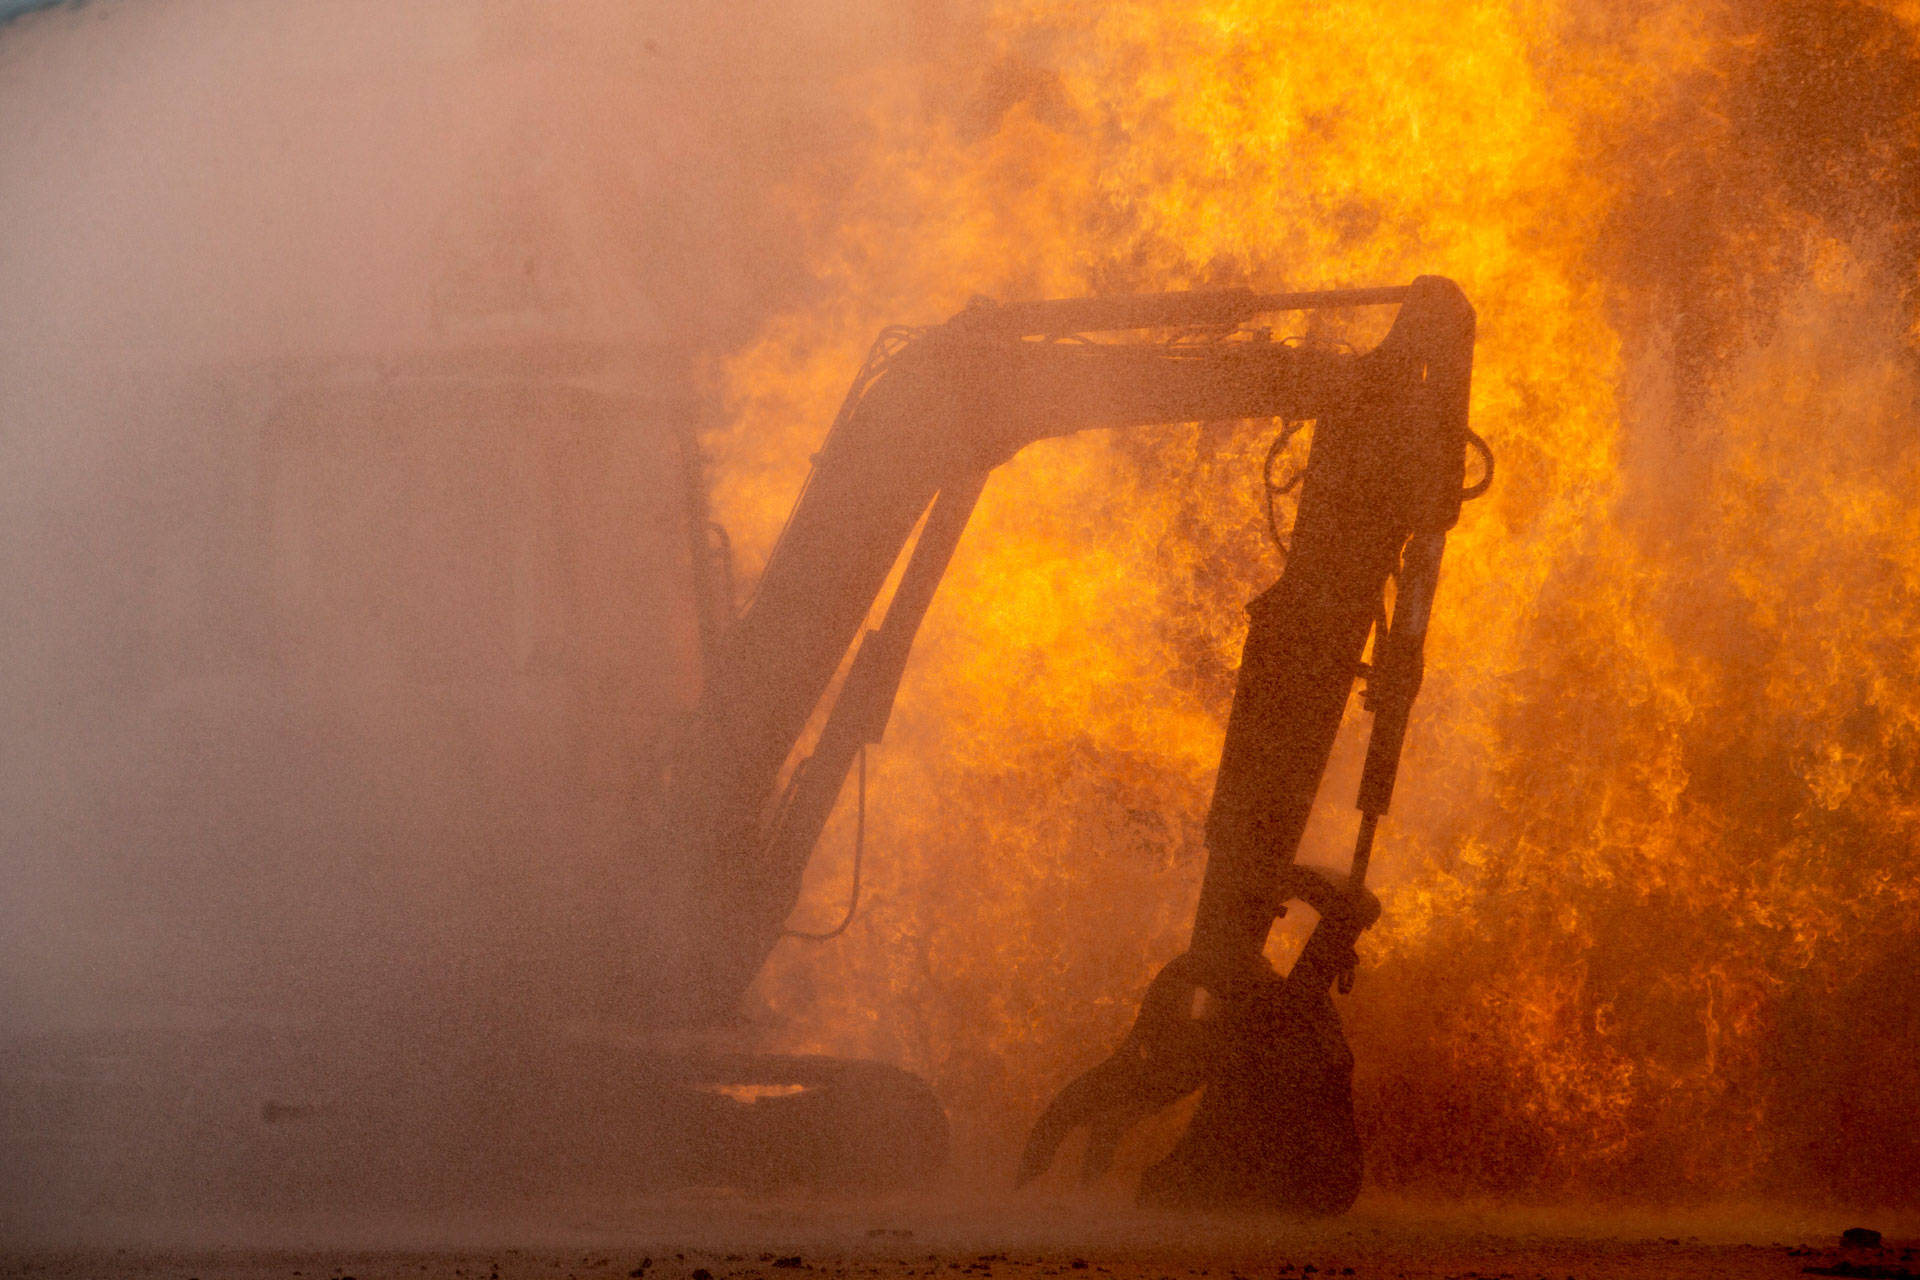 Construction equipment catches fire from a blaze following an explosion of a gas line on Feb. 6, 2019 in San Francisco's Richmond District. Santiago Mejia-Pool/Getty Images